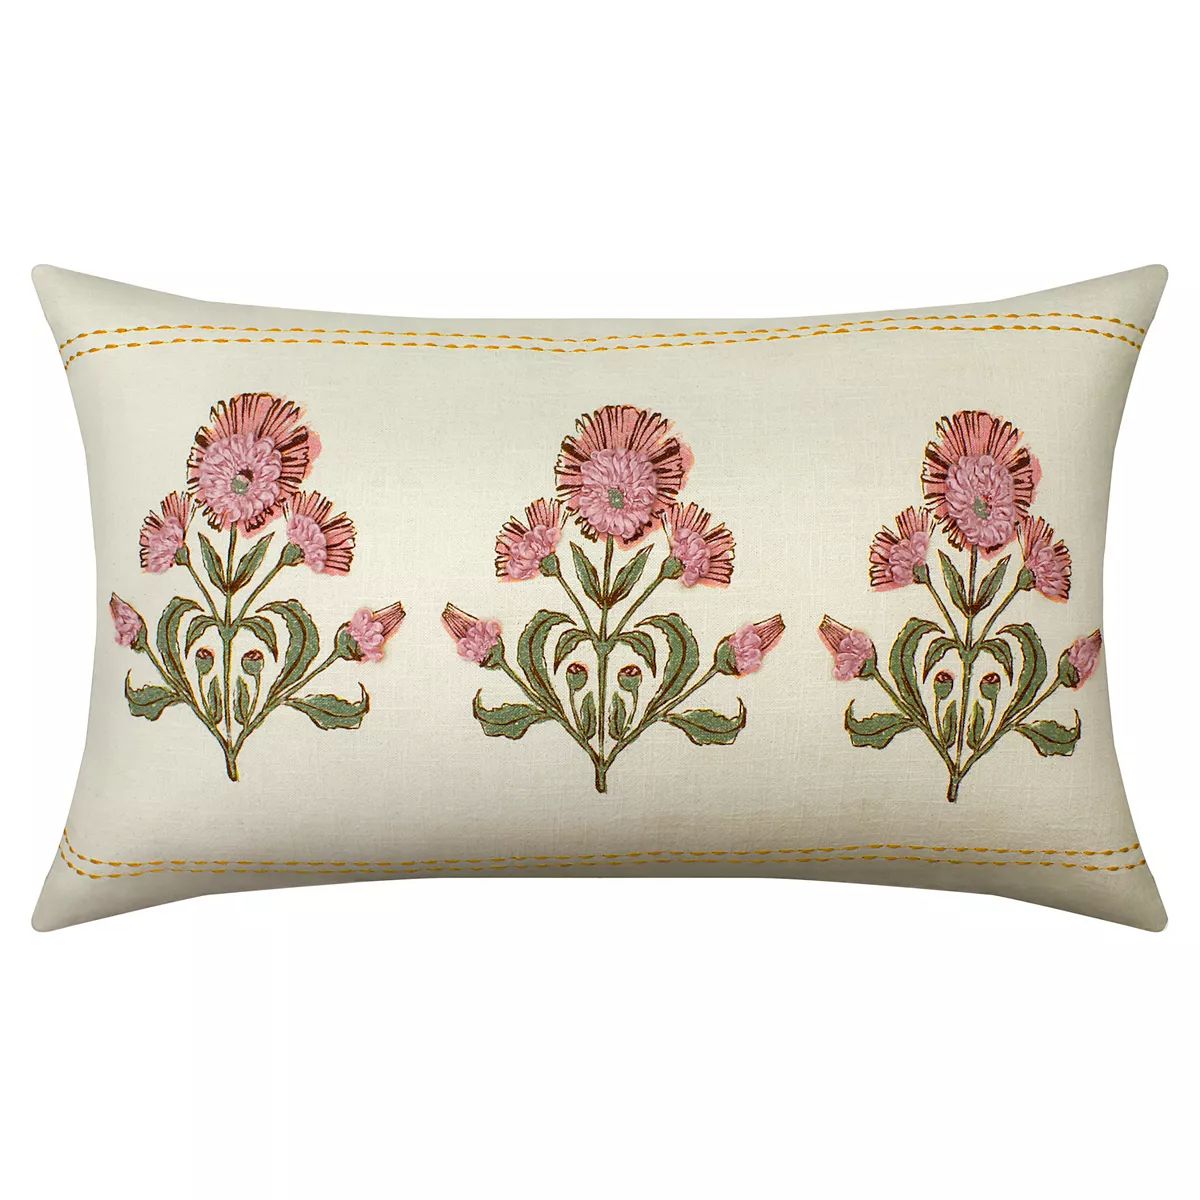 Sonoma Goods For Life® Ivory Floral Trio Decorative Pillow | Kohl's